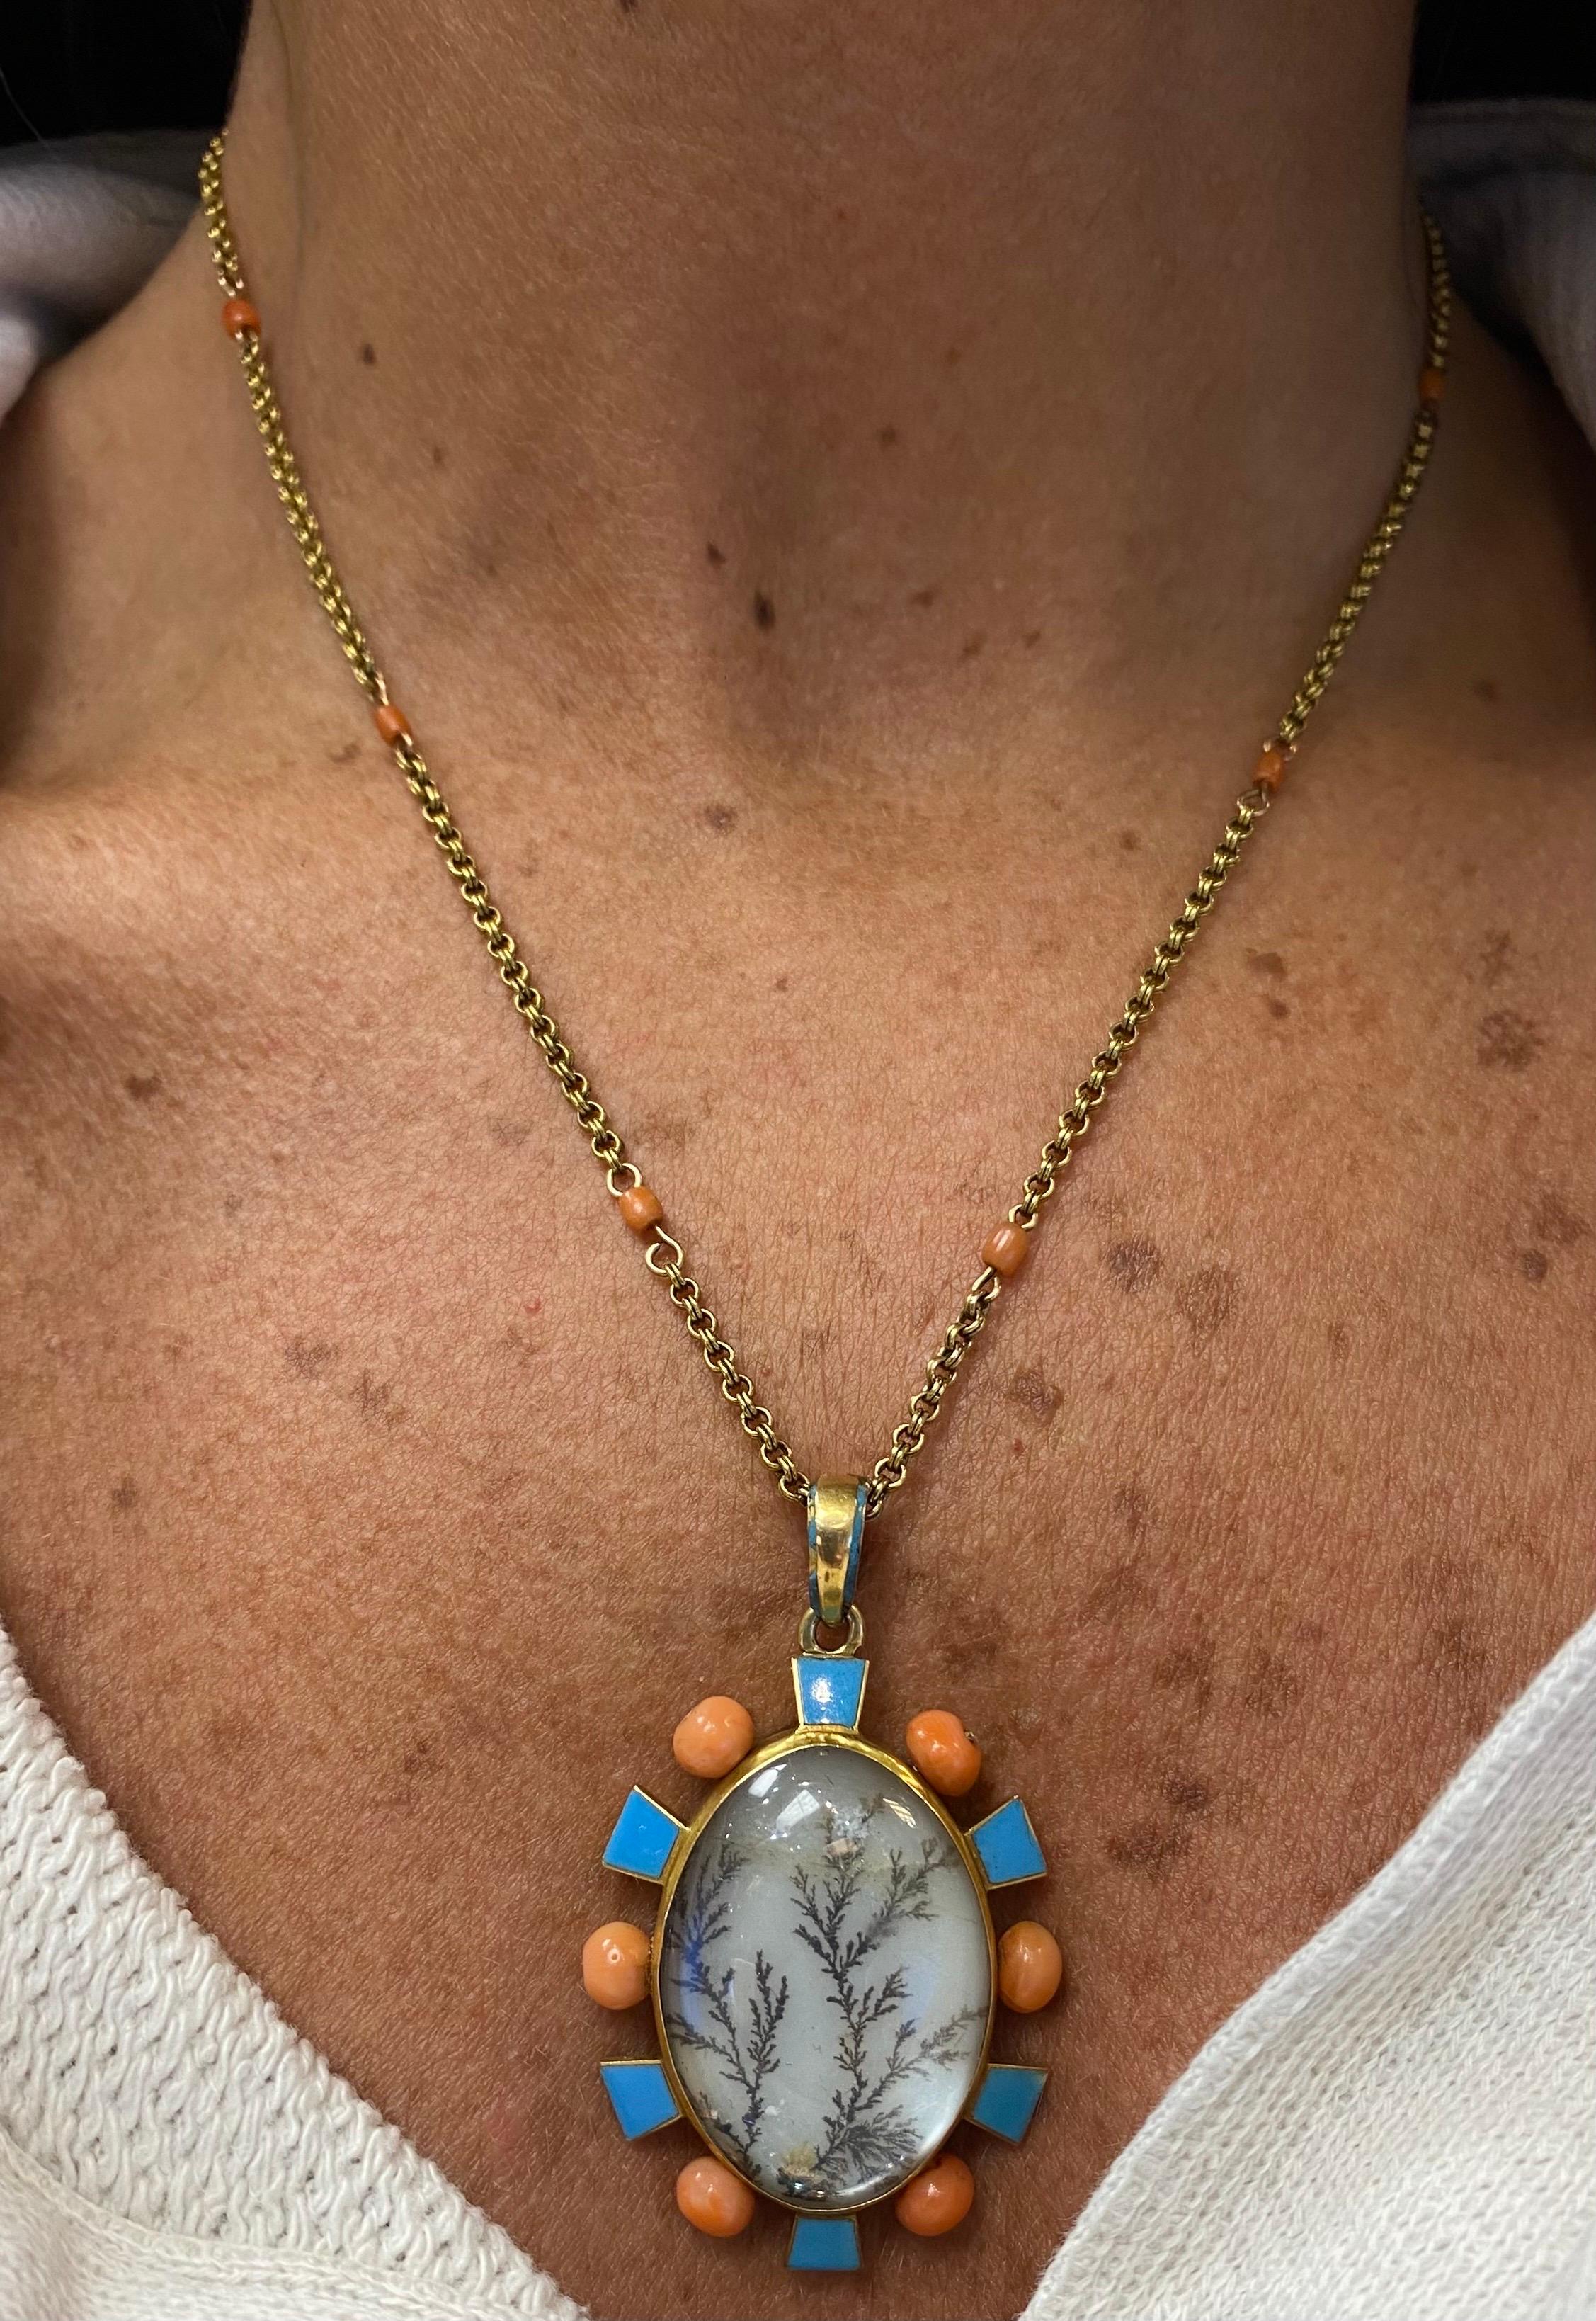 Antique Moss Agate and Coral Pendant Necklace

A moss agate pendant necklace adorned with blue enamel and 6 coral beads. The gold chain features an additional 8 coral beads

Made circa 1860

Approximate Chain Measurements: 16